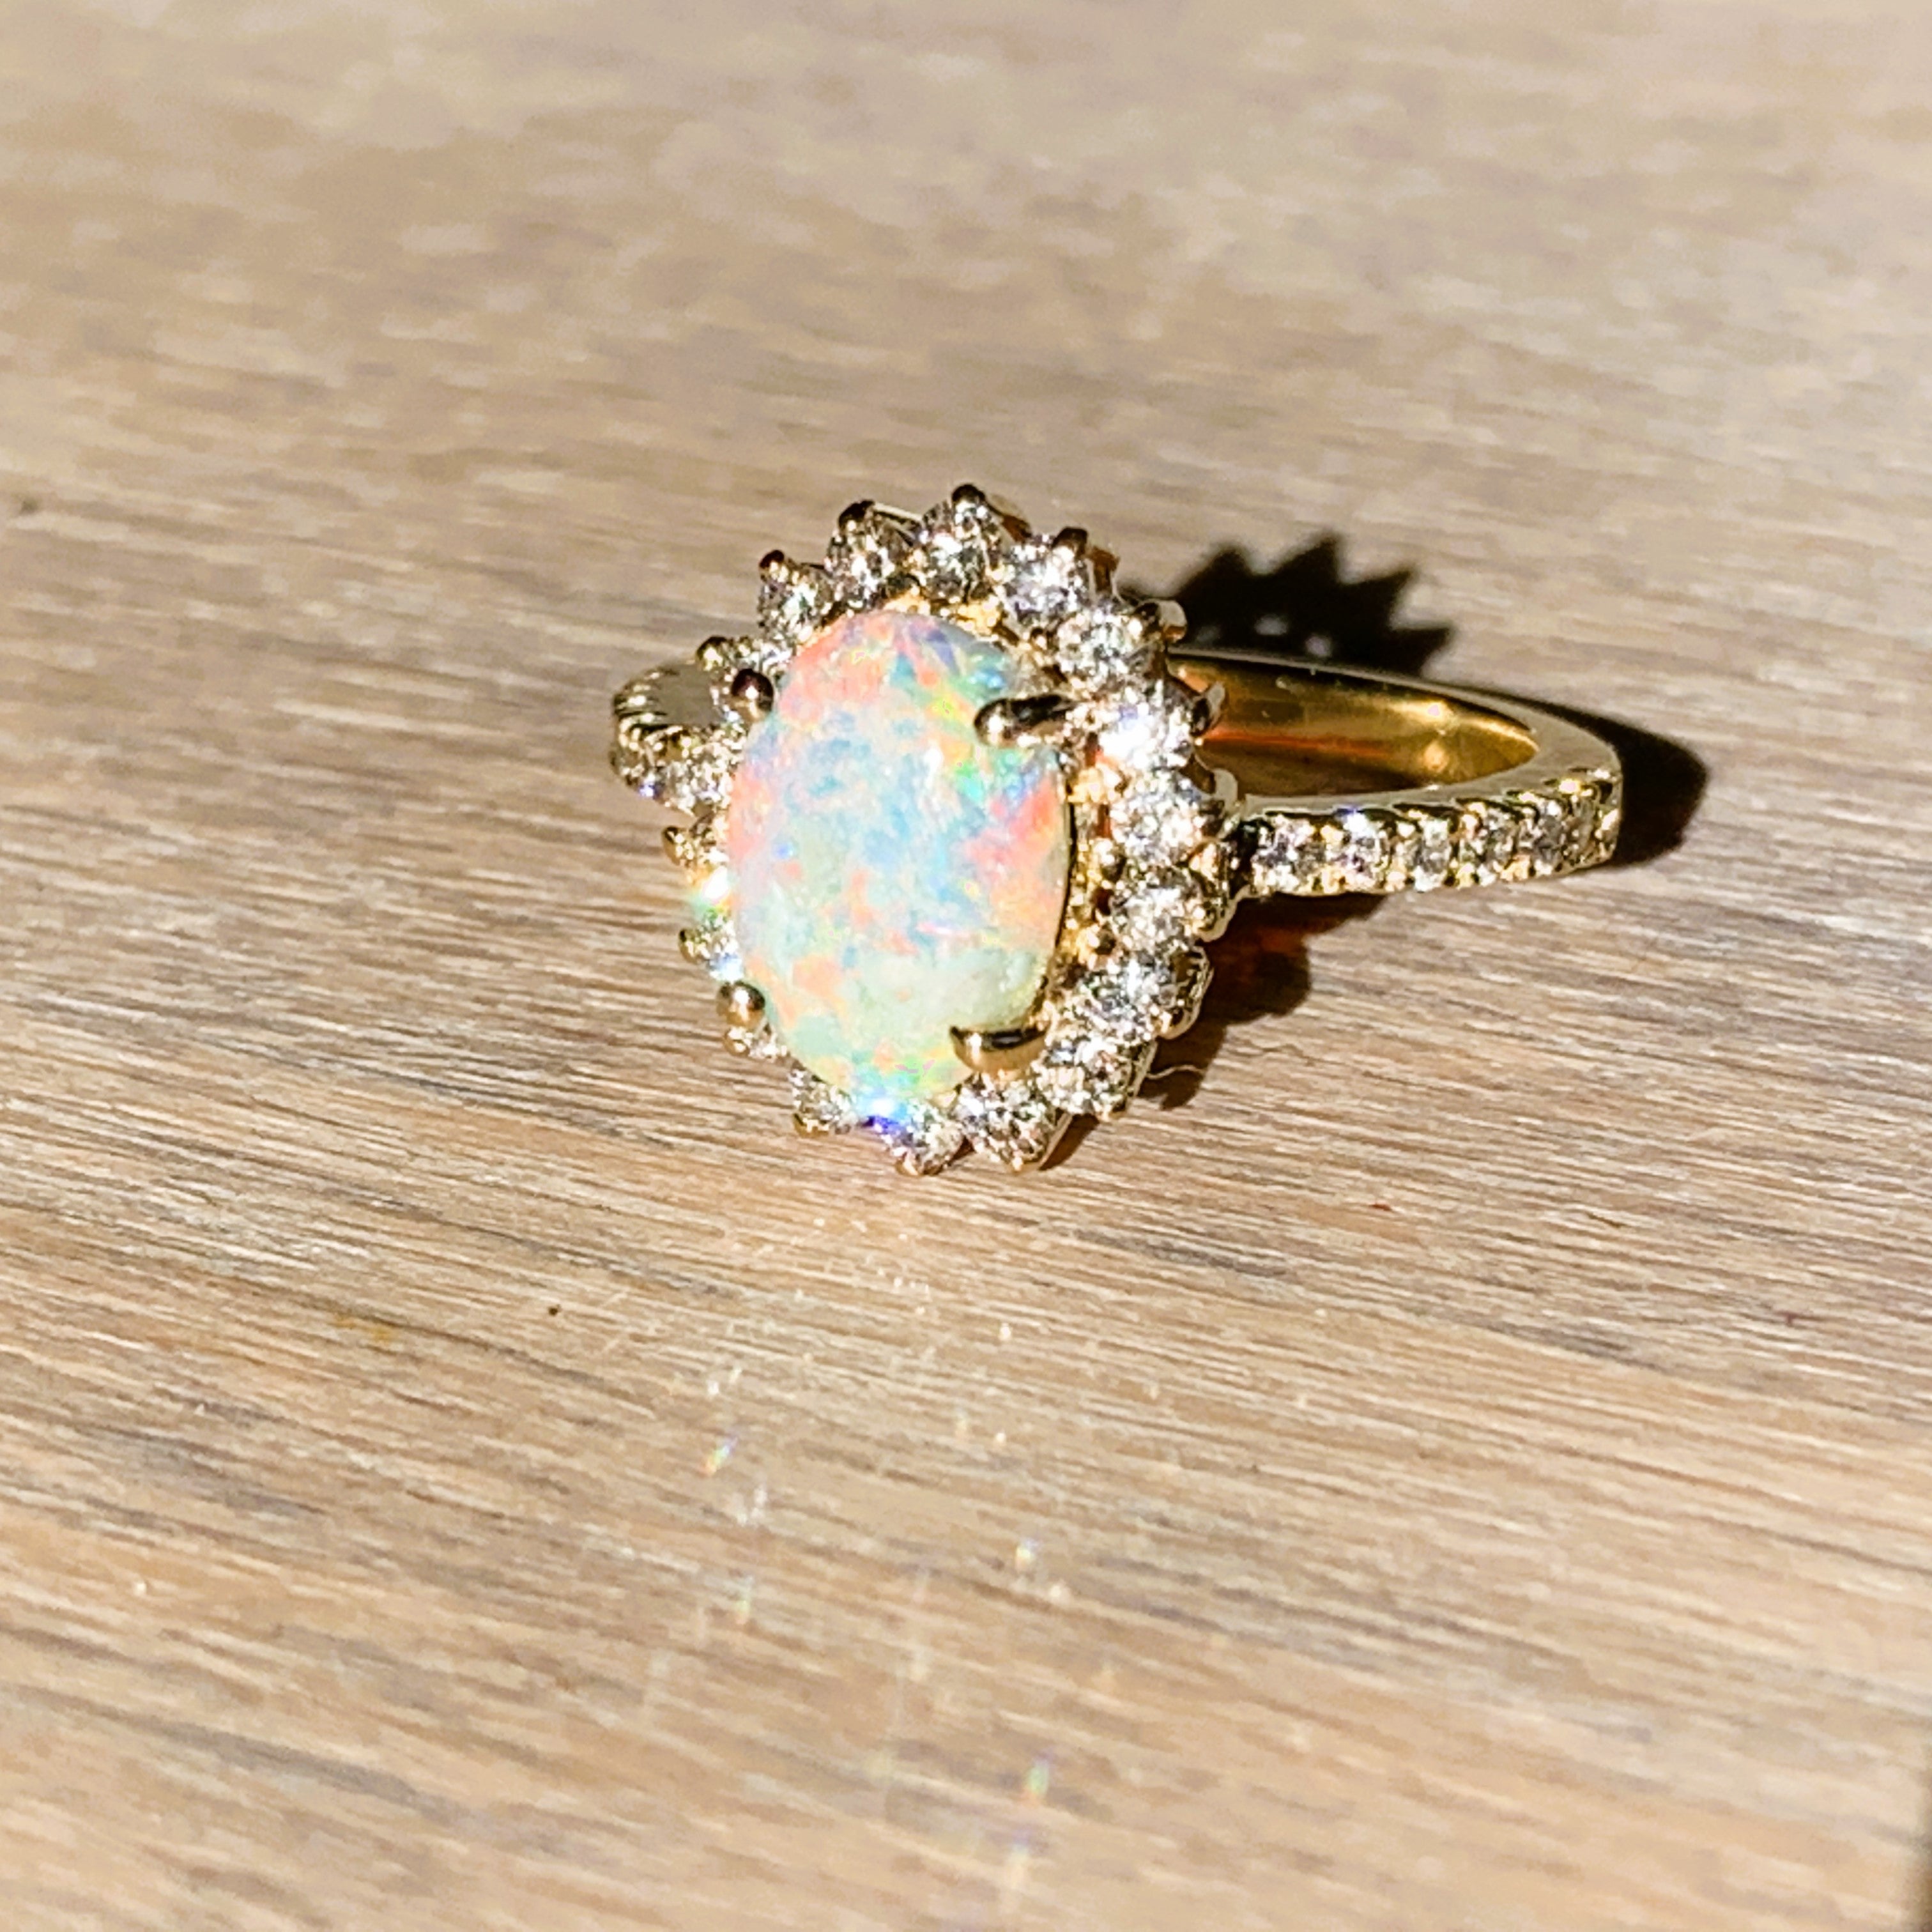 18kt Yellow Gold cluster Black Crystal Opal 0.91ct with Diamonds ring - Masterpiece Jewellery Opal & Gems Sydney Australia | Online Shop